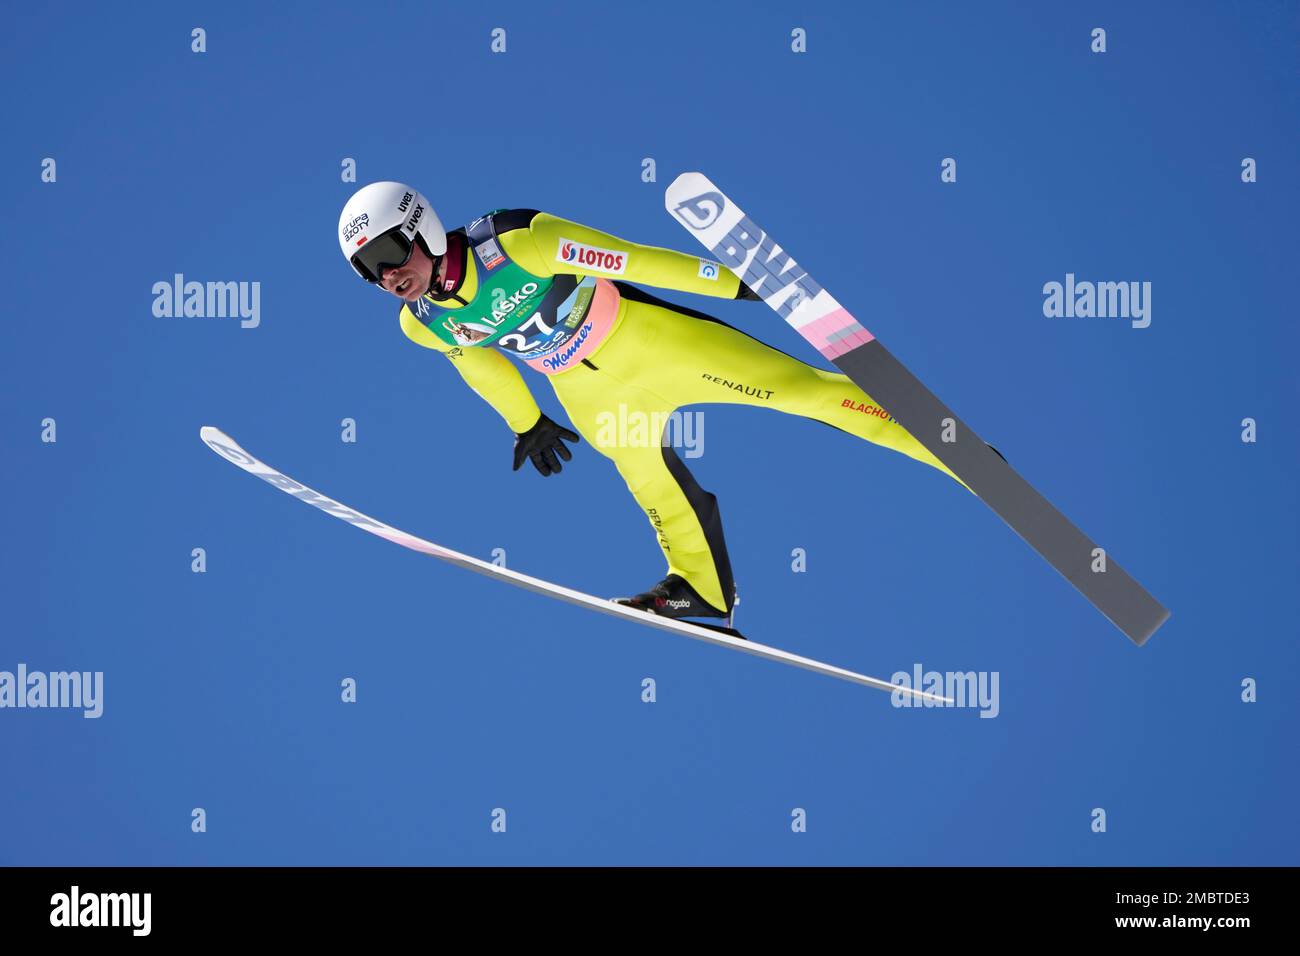 Piotr Zyla, of Poland, soars through the air during his first round jump in the Men Flying Hill Individual competition at the FIS Ski Jumping World Cup in Planica, Slovenia, Sunday, March 27, 2022. (AP Photo/Darko Bandic) Stockfoto